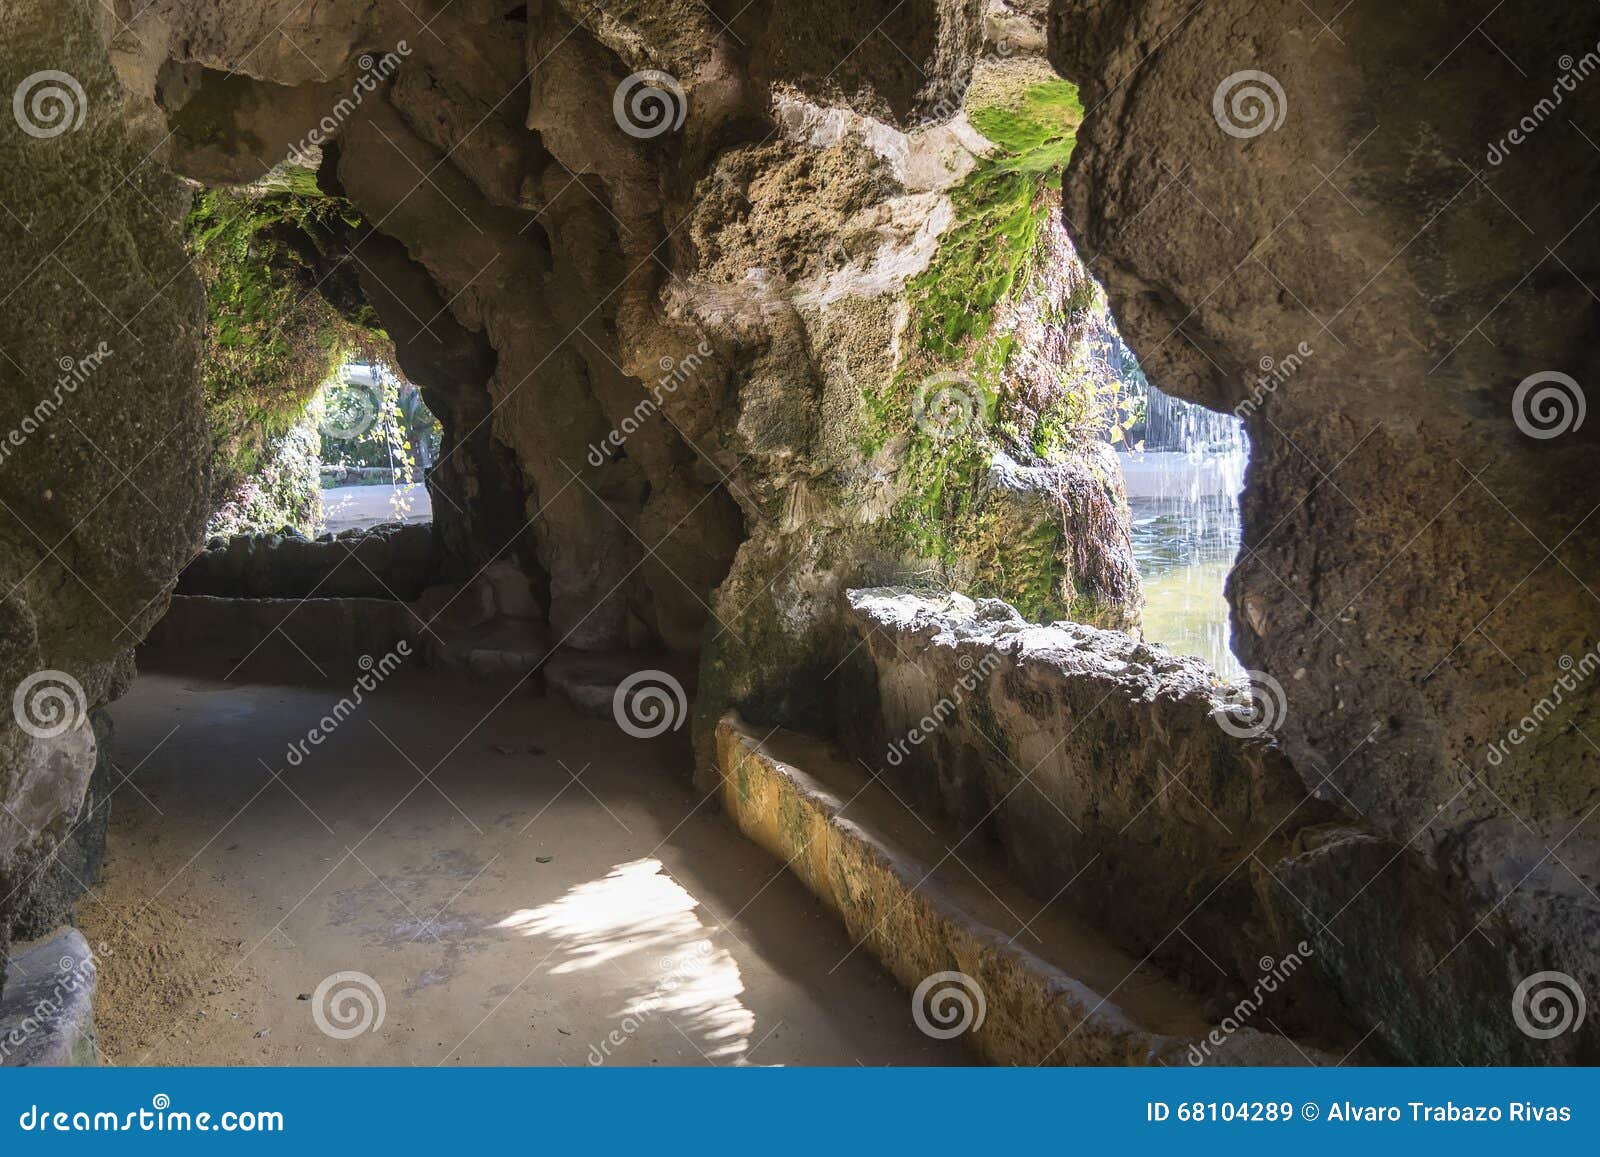 cave in the genoves park, cadiz, andalusia, spain